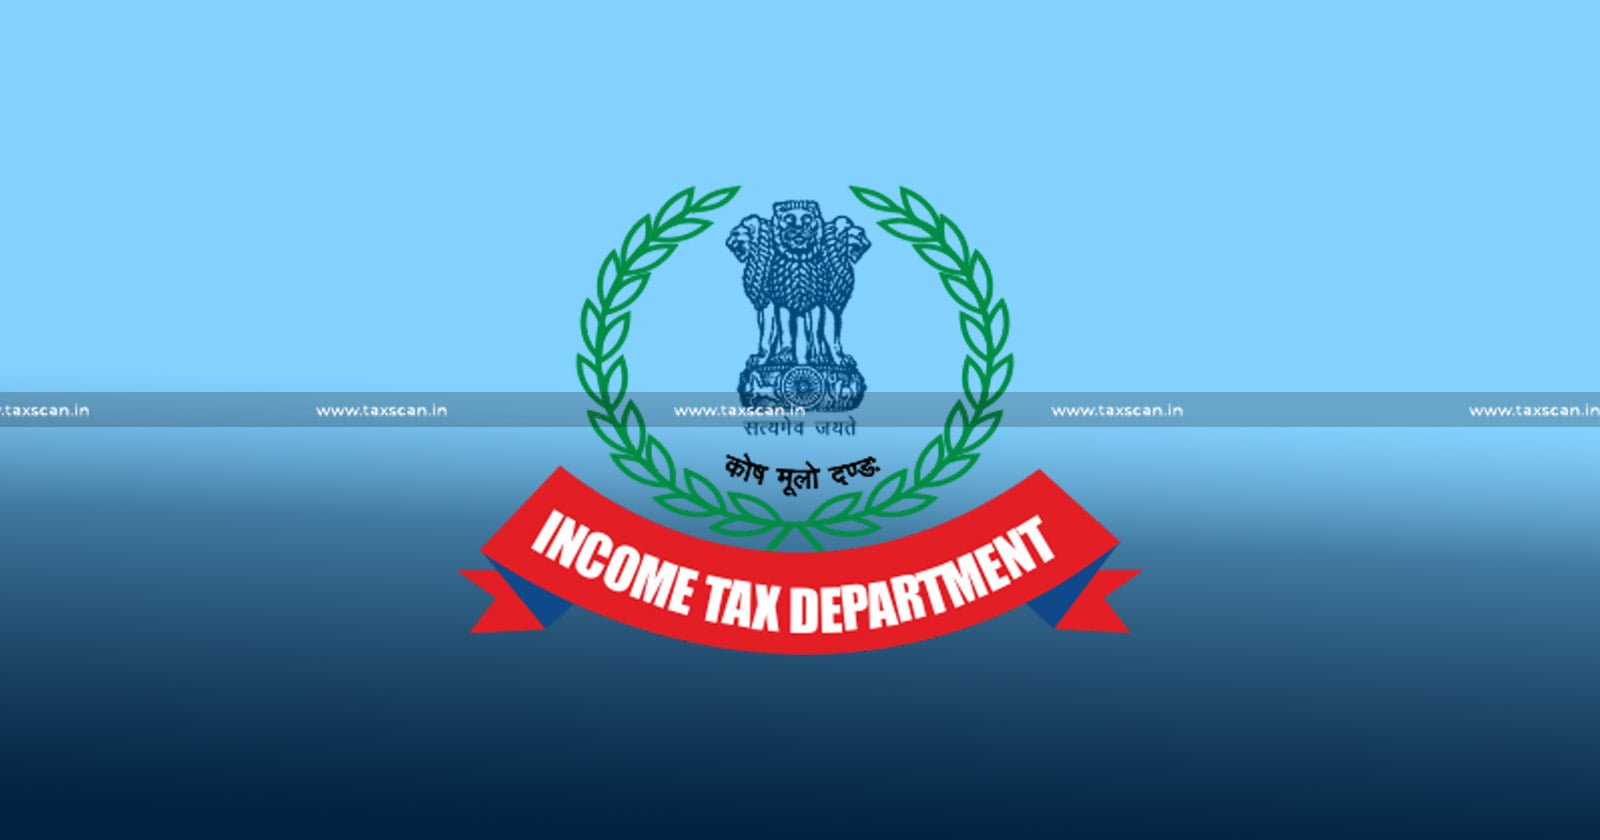 Income Tax Department - FAQ - Responses - Submitting Responses to Notices and Letters - Letters - e-Verification Scheme - taxscan